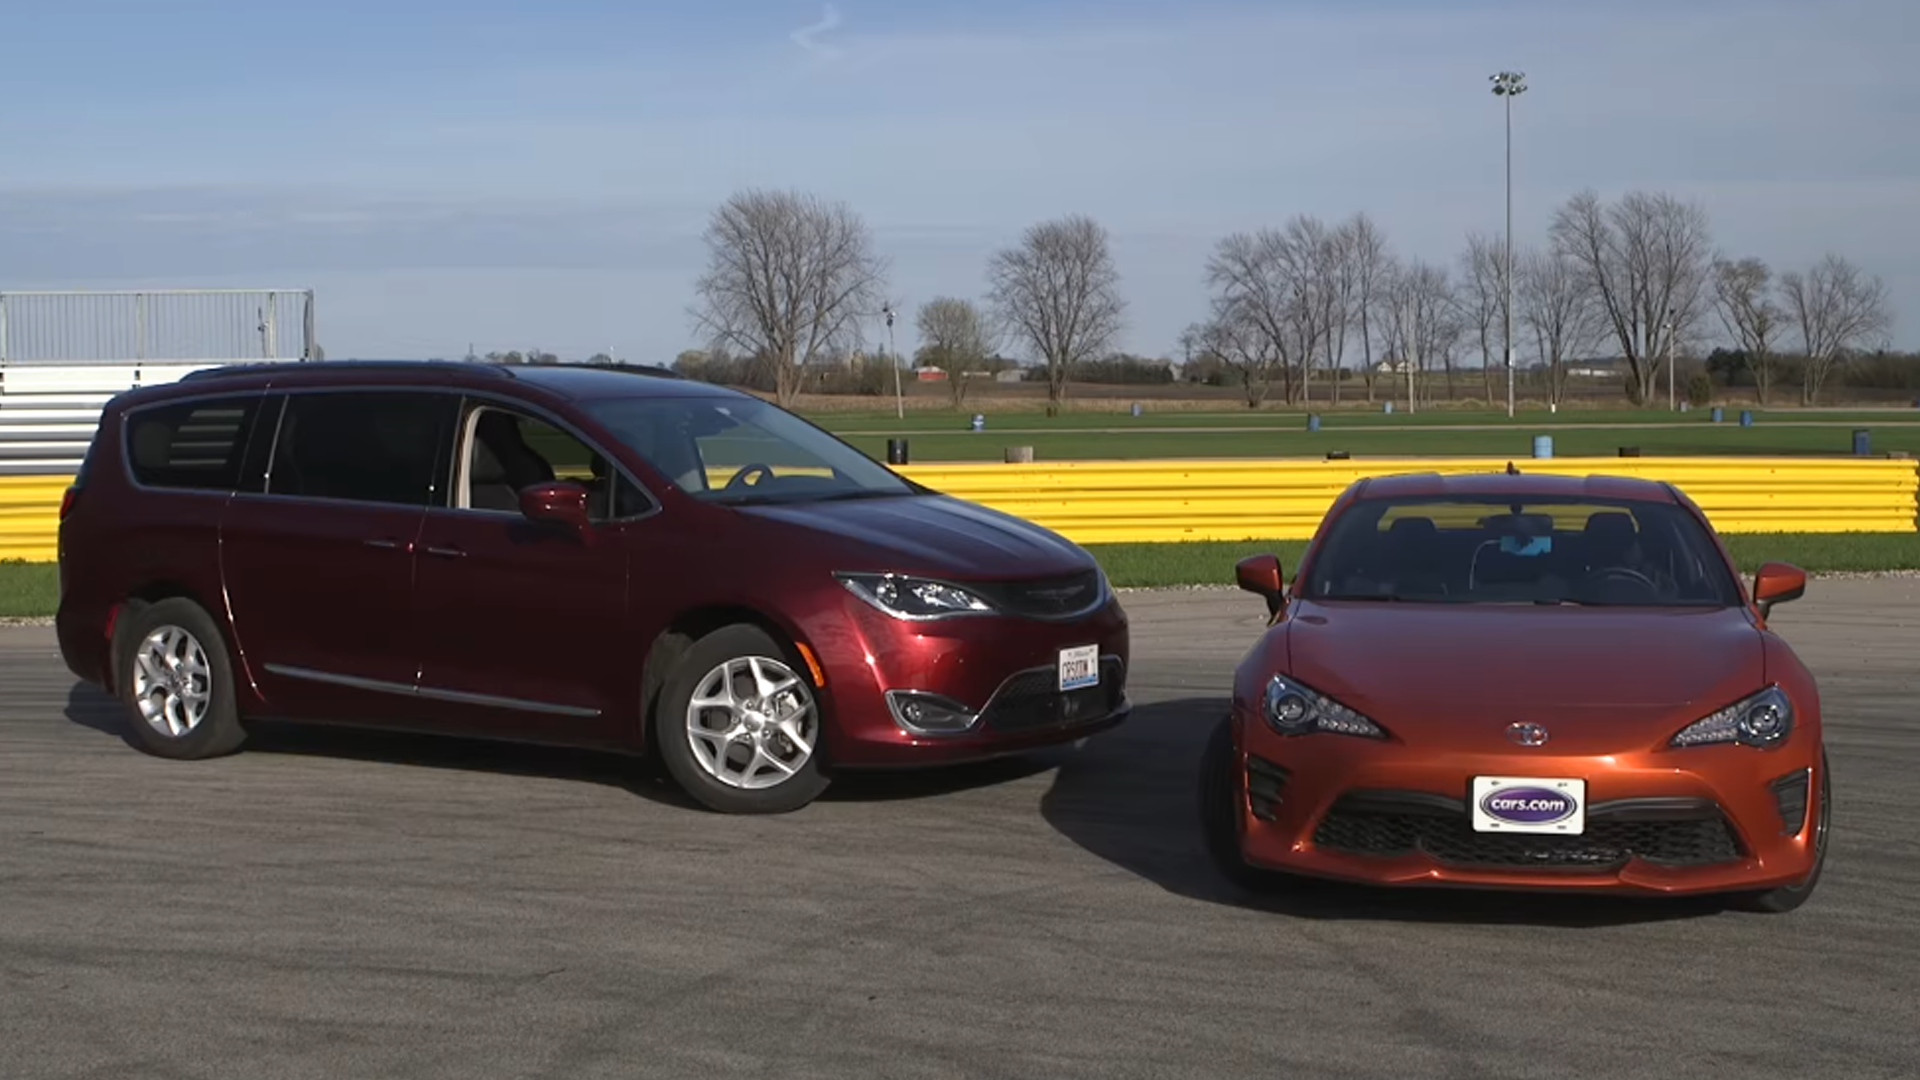 Will a Toyota 86 Beat a Chrysler Pacifica in a Drag Race?